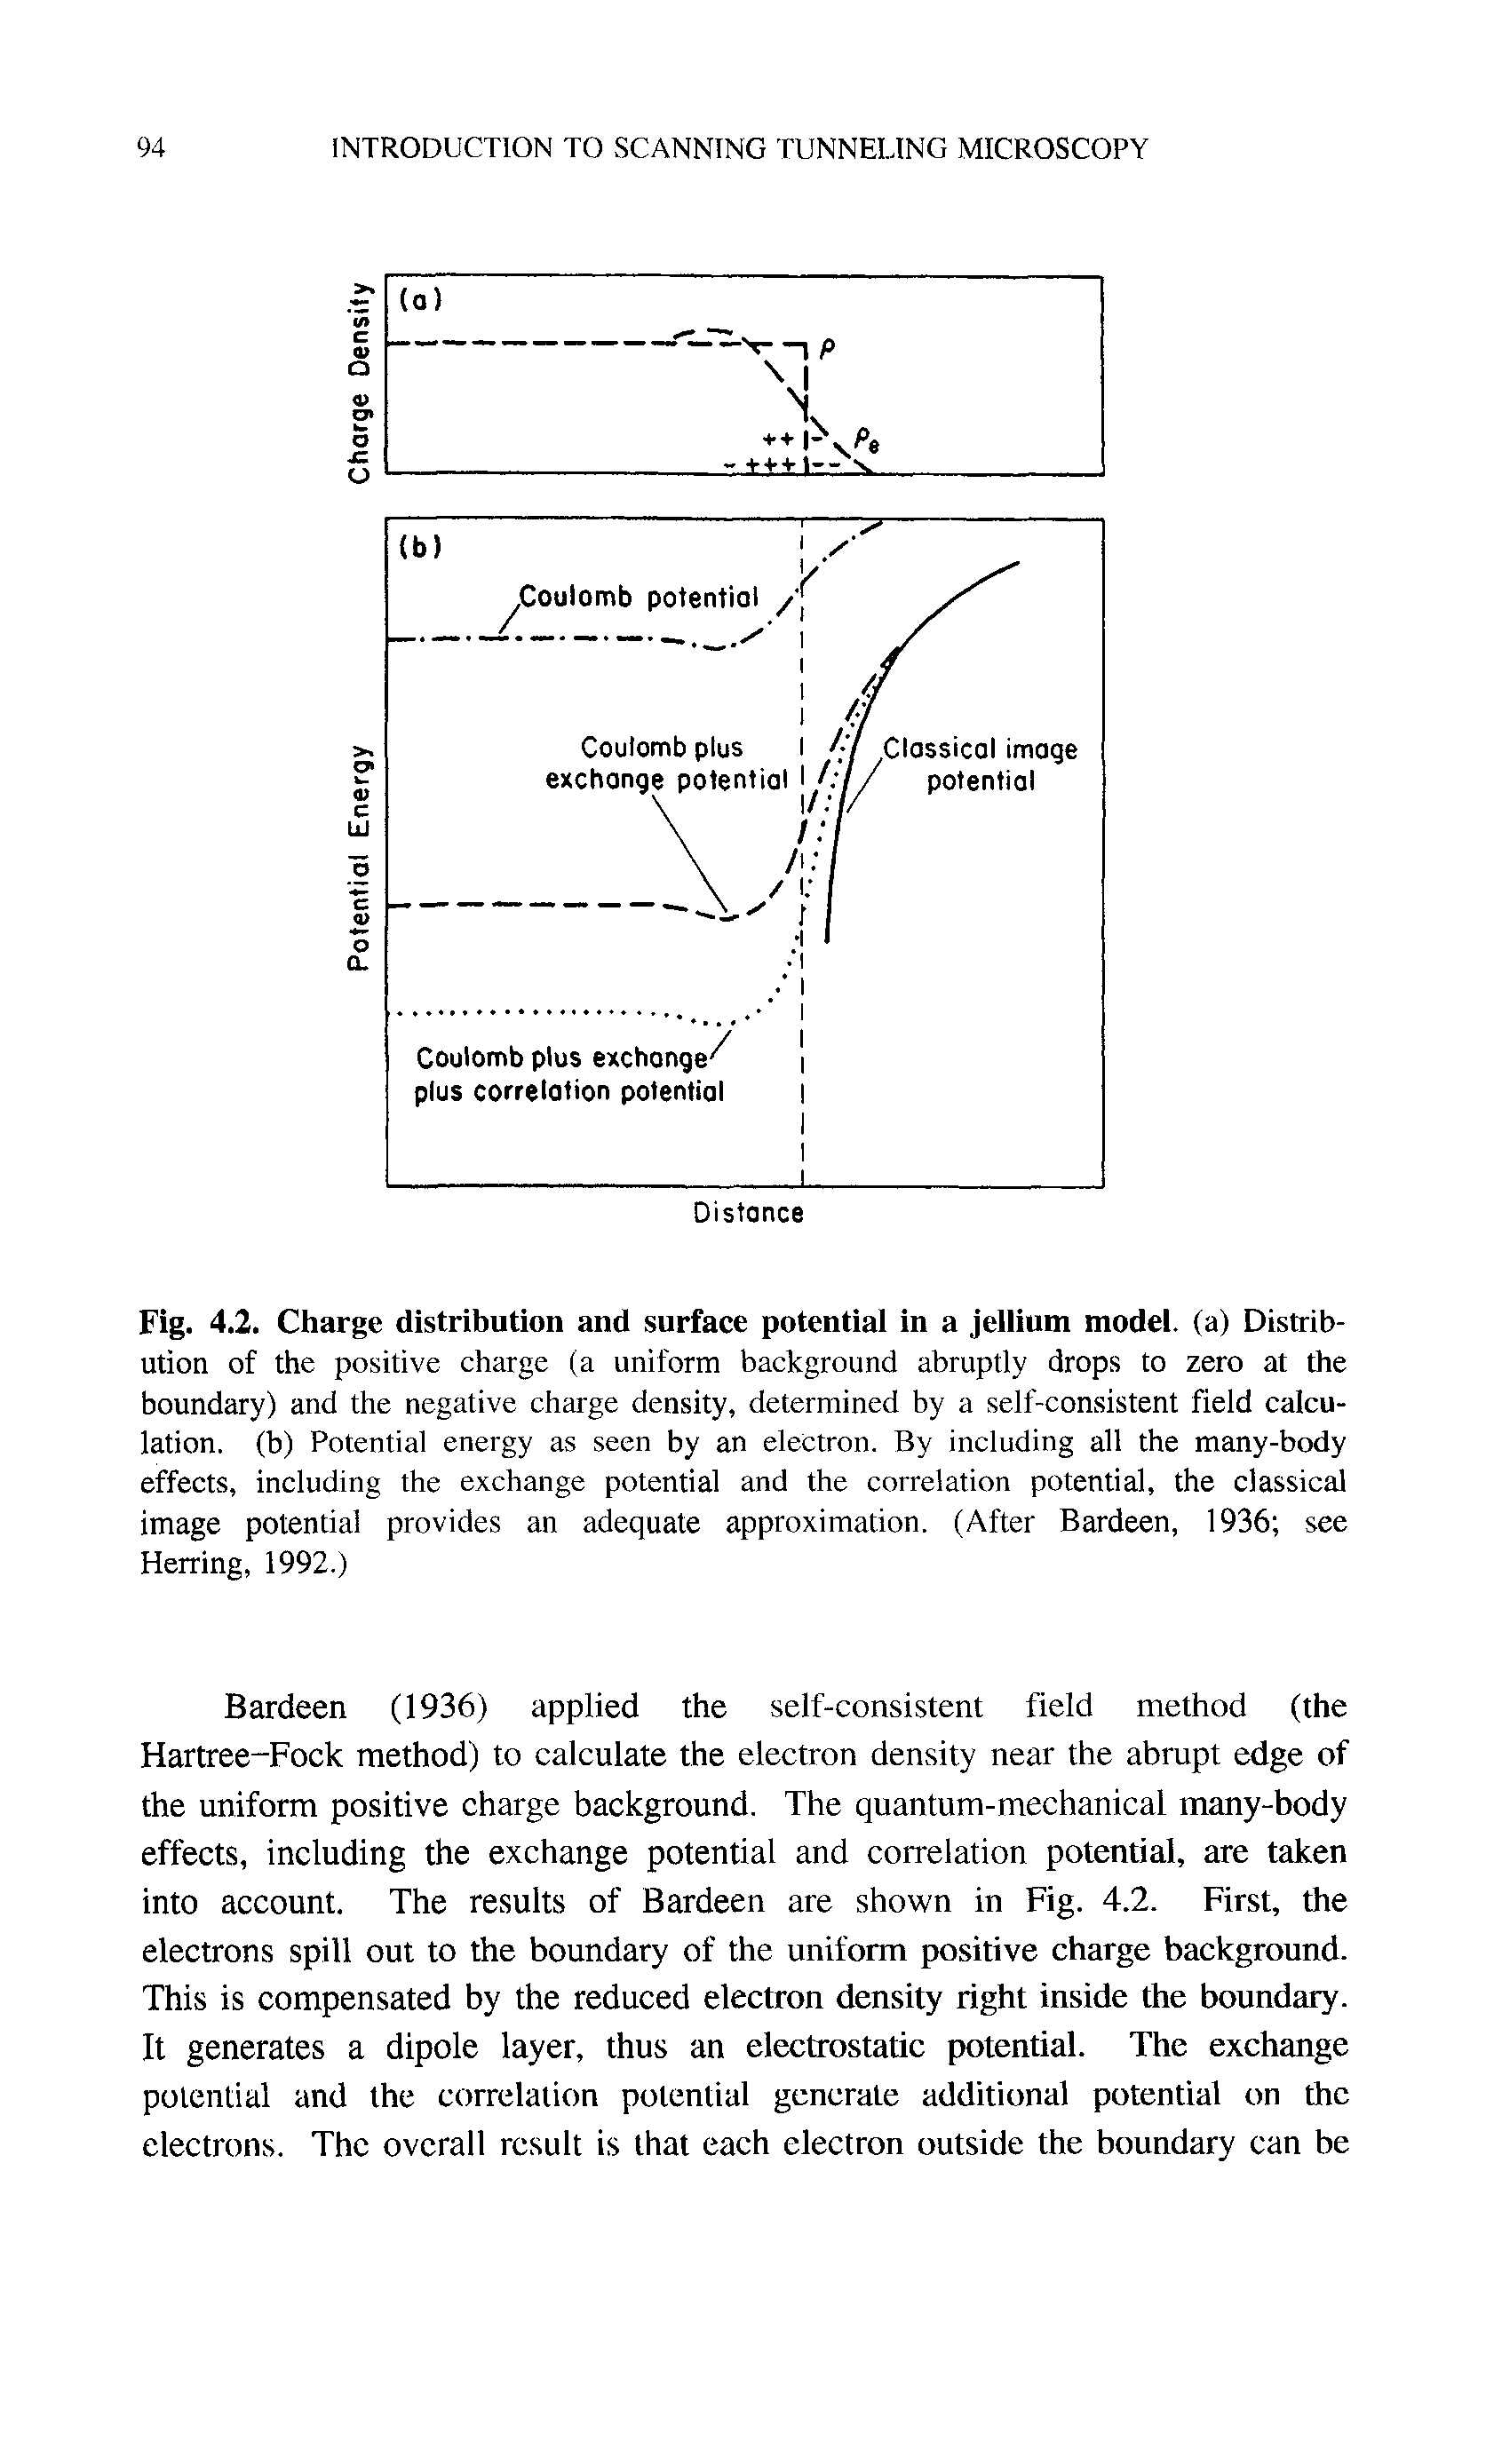 Fig. 4.2. Charge distribution and surface potential in a jellium model, (a) Distribution of the positive charge (a uniform background abruptly drops to zero at the boundary) and the negative charge density, determined by a self-consistent field calculation. (b) Potential energy as seen by an electron. By including all the many-body effects, including the exchange potential and the correlation potential, the classical image potential provides an adequate approximation. (After Bardeen, 1936 see Herring, 1992.)...